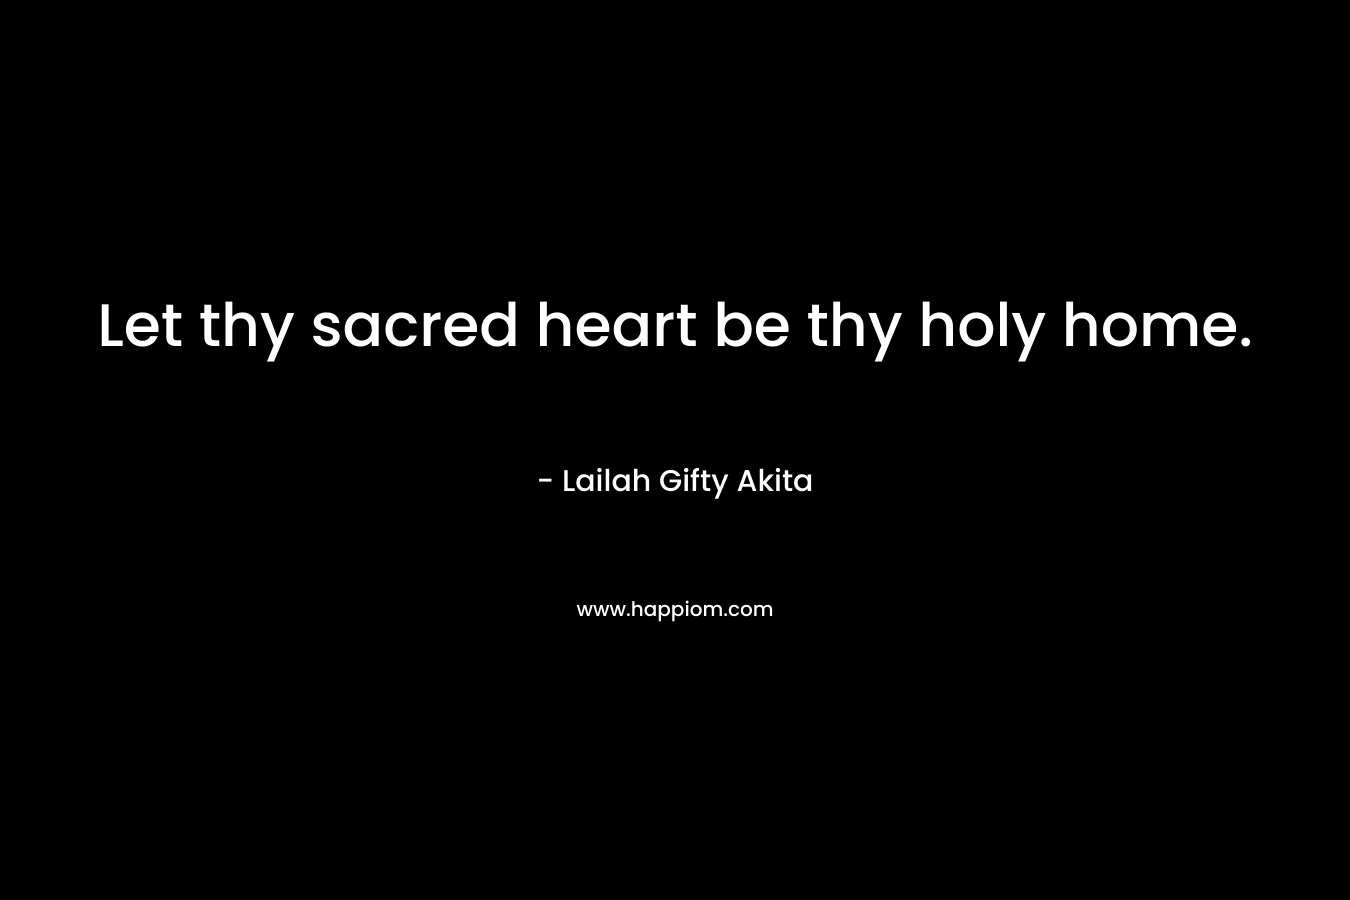 Let thy sacred heart be thy holy home.